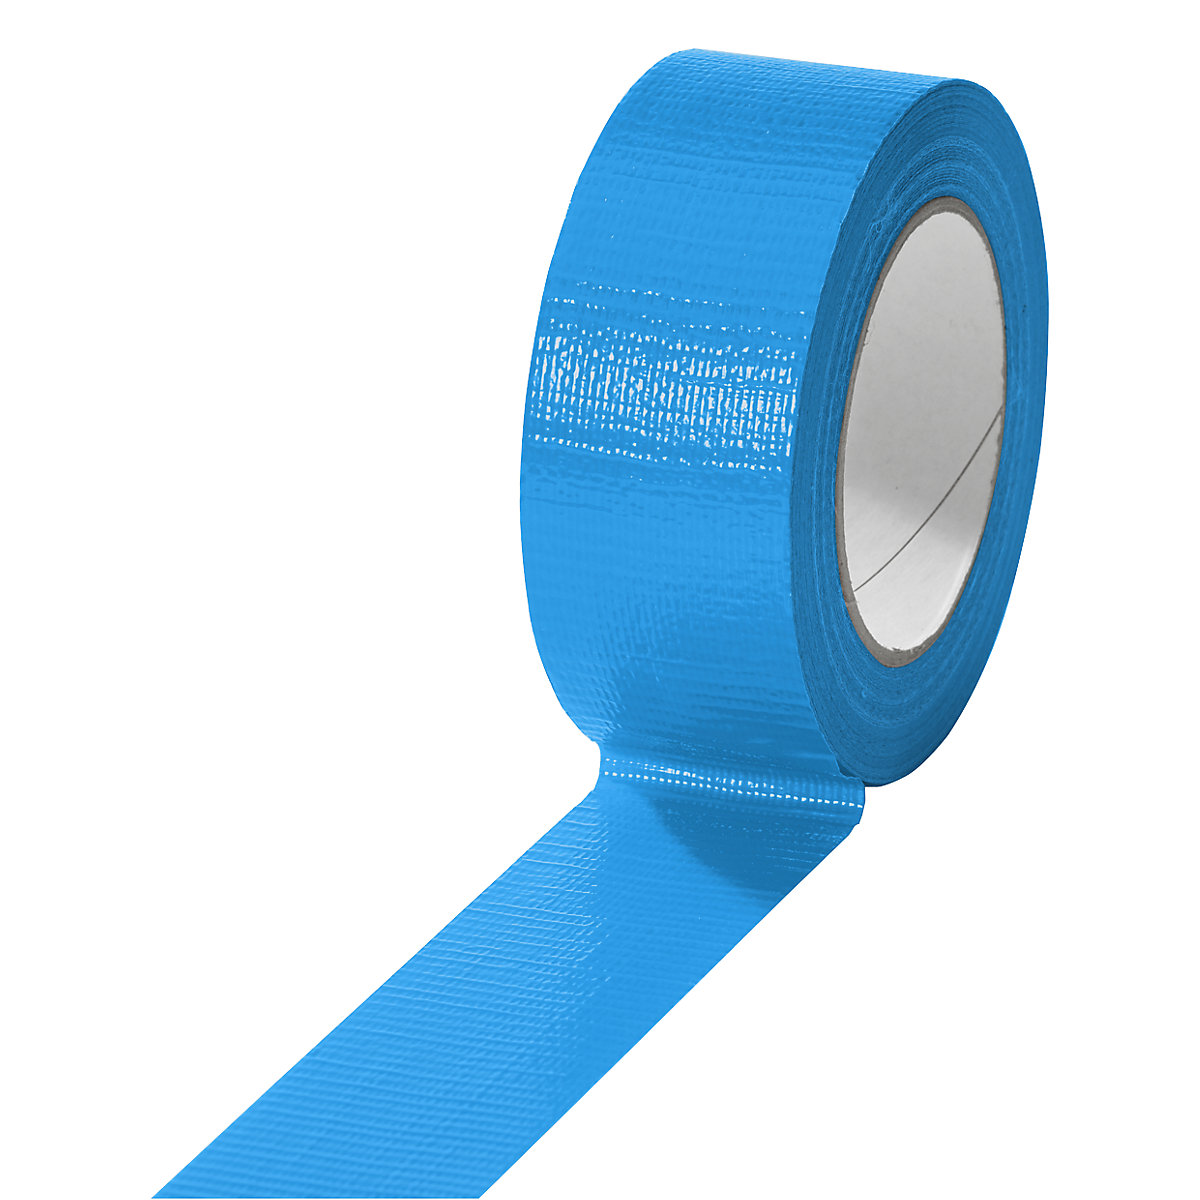 Fabric tape, in different colours, pack of 24 rolls, blue, tape width 38 mm-4